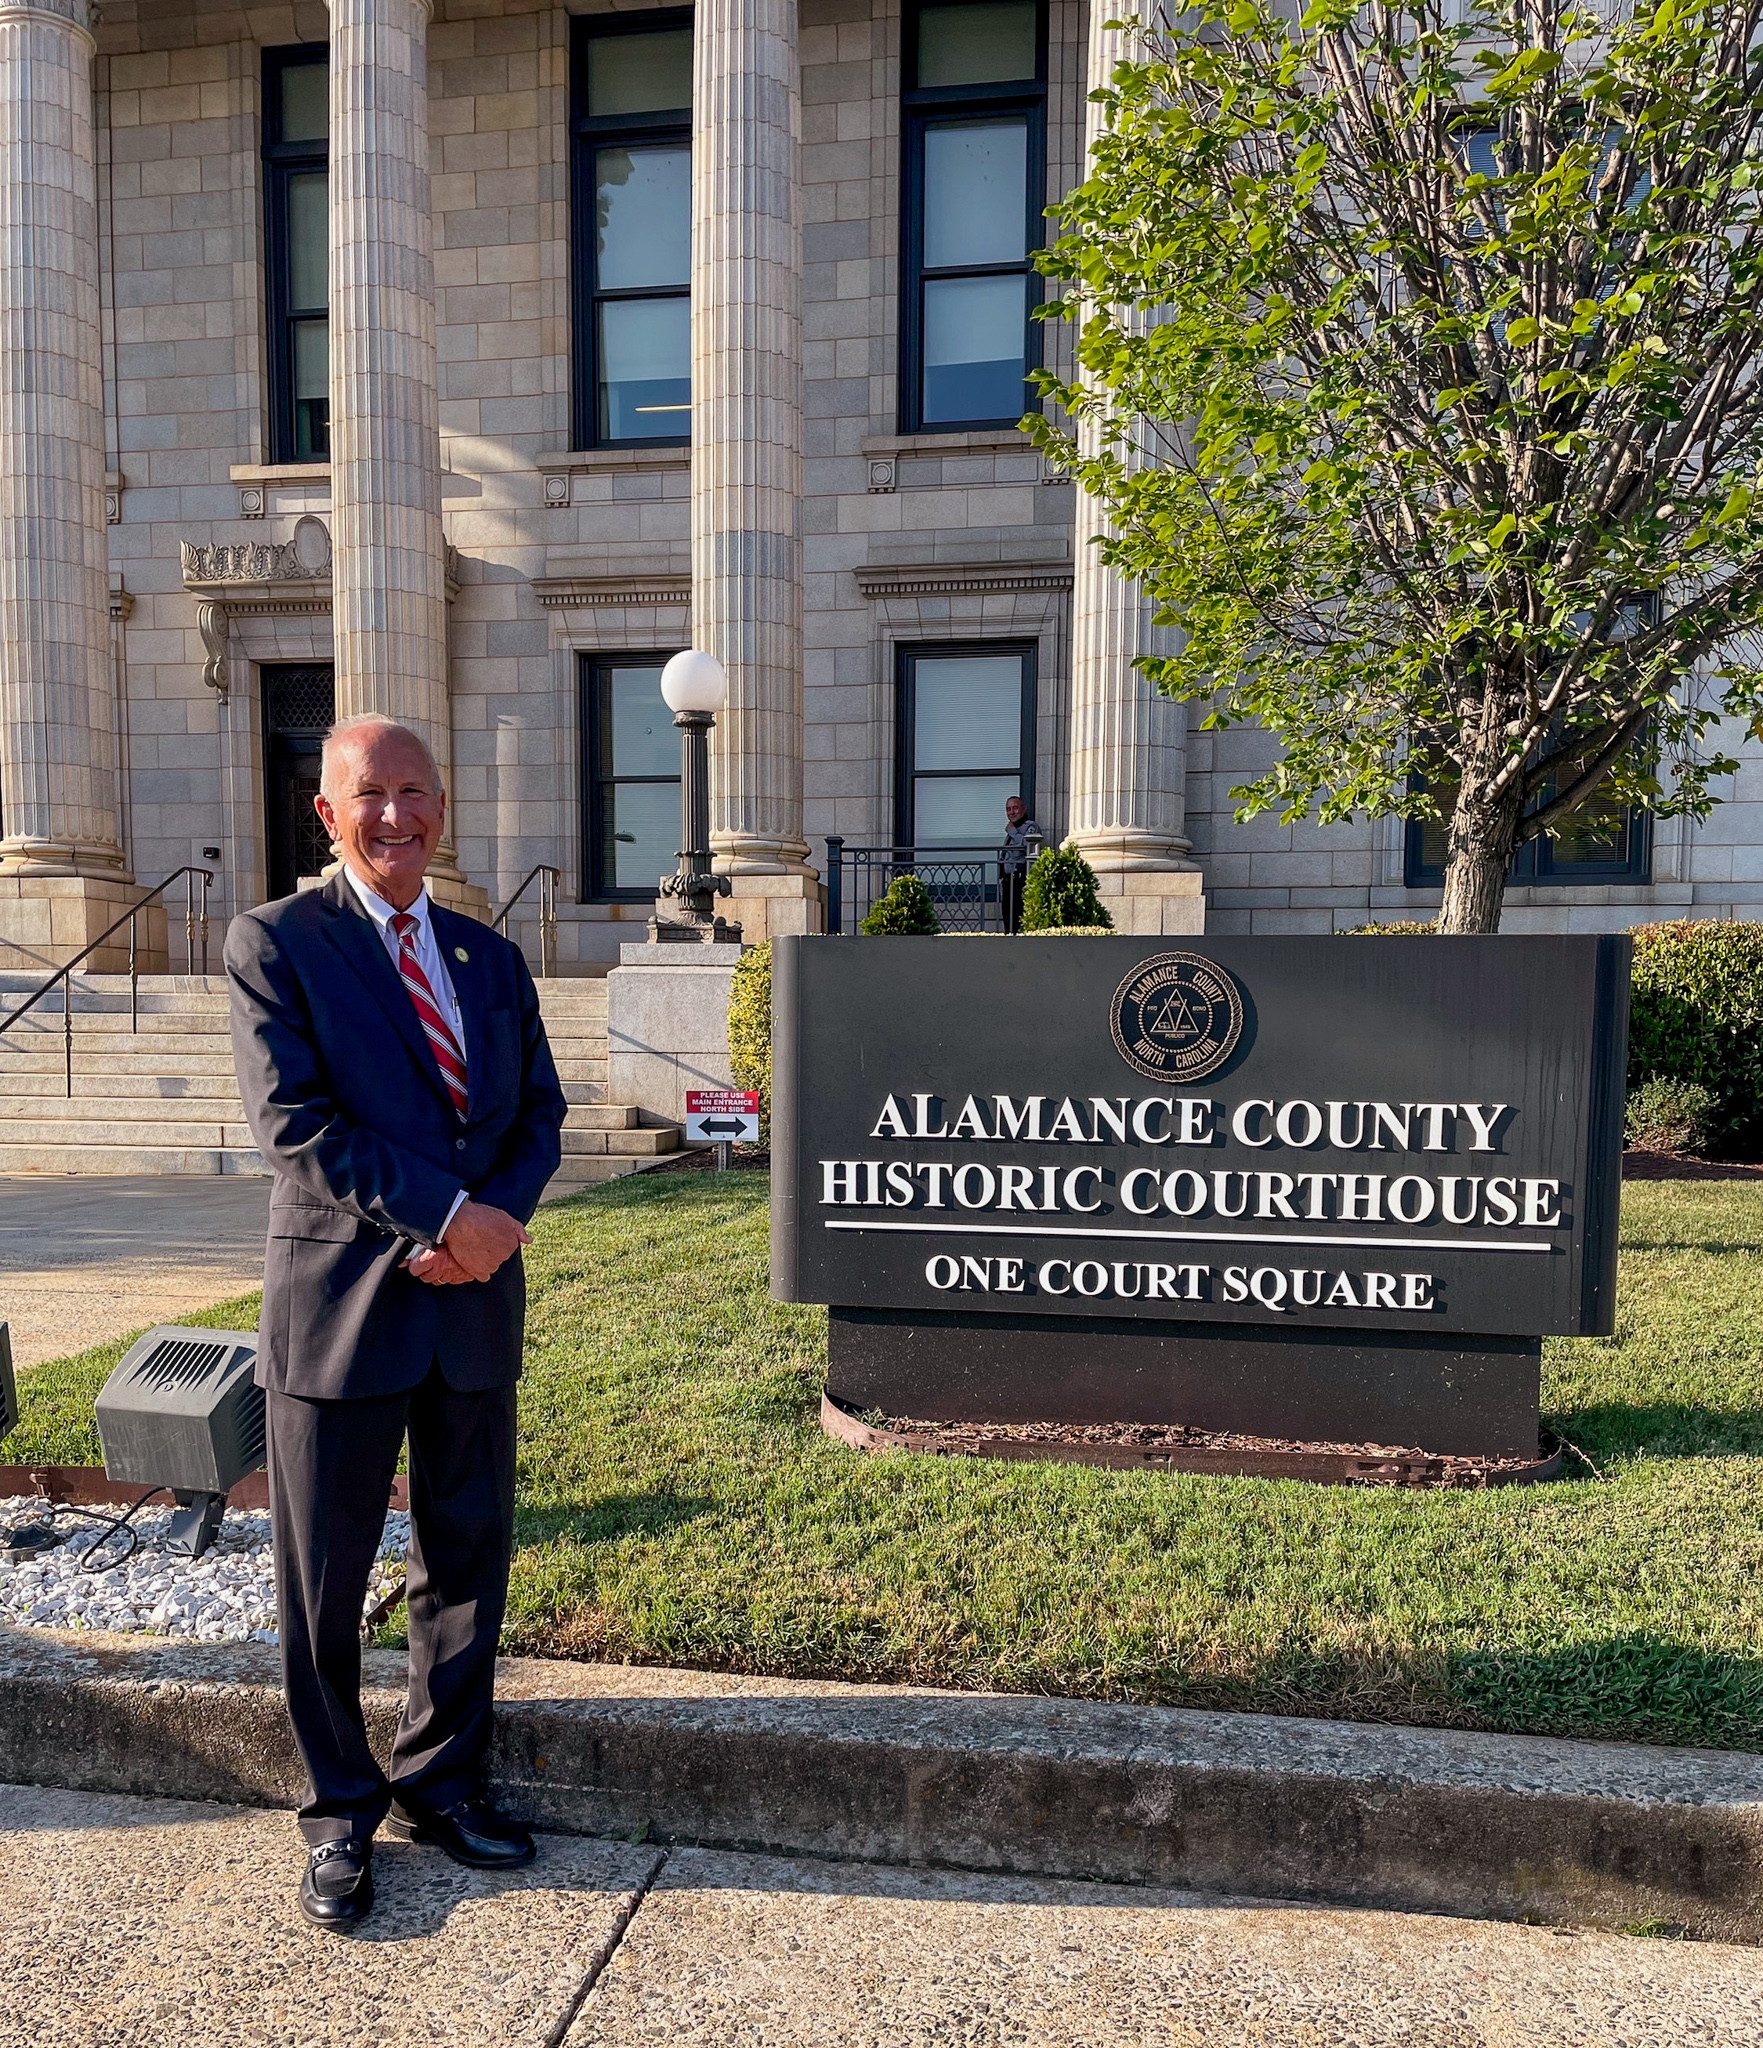 Chief Justice Newby in front of the Alamance County Courthouse in Graham